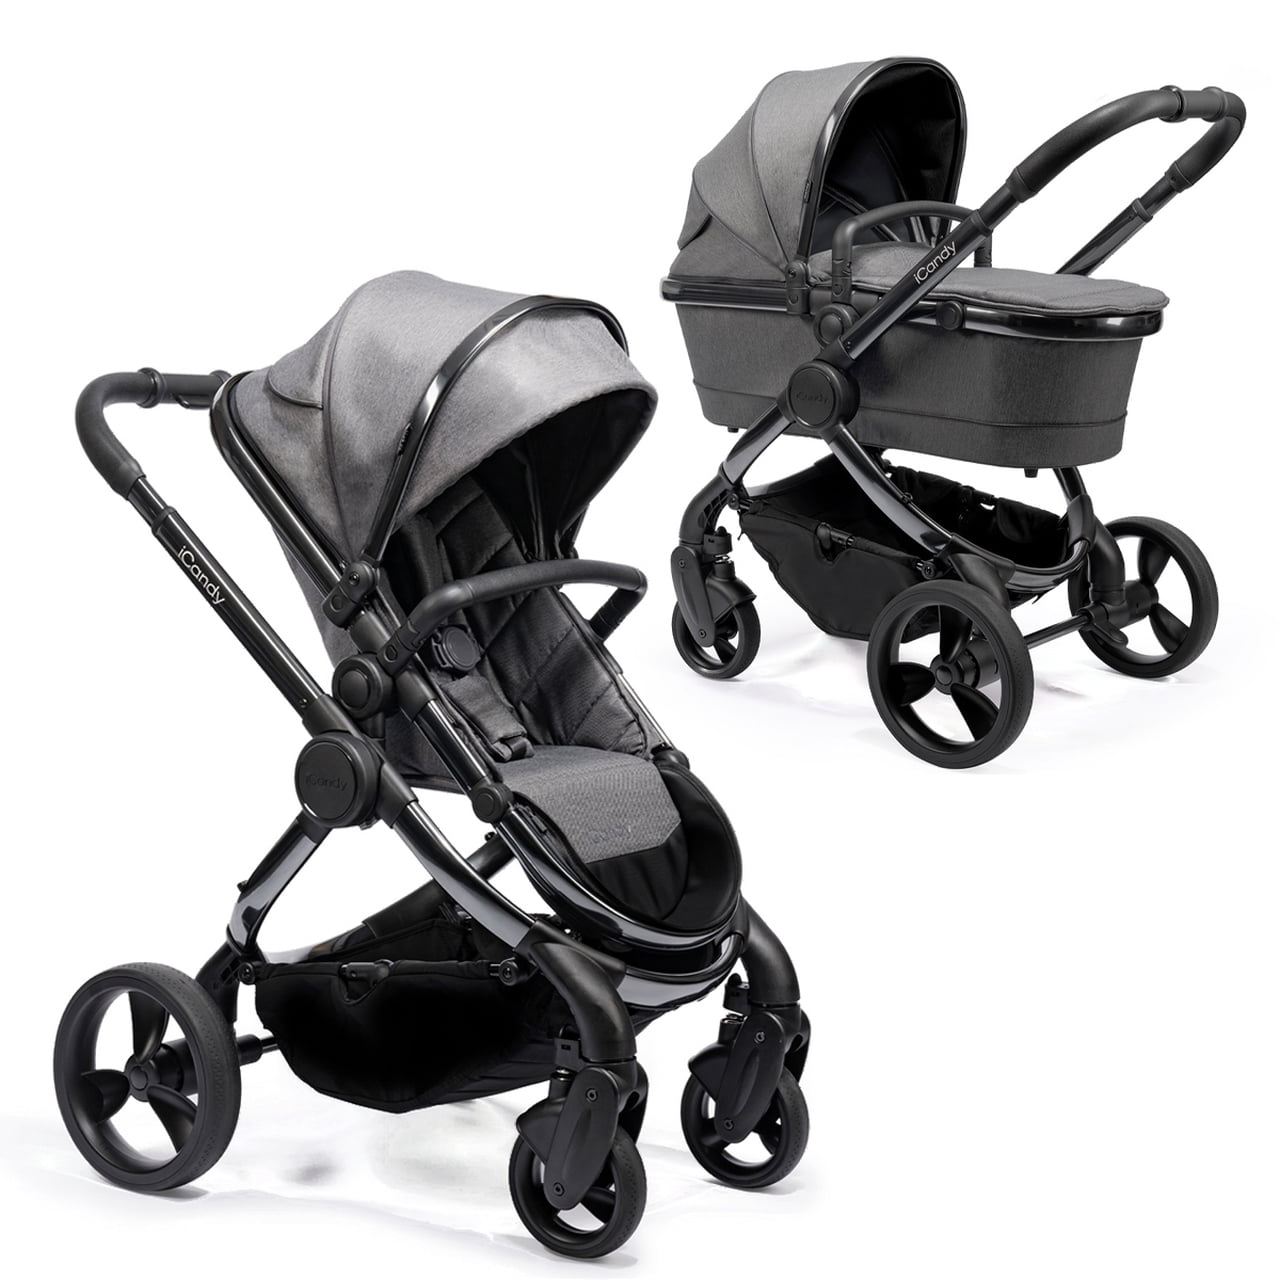 icandy peach travel system